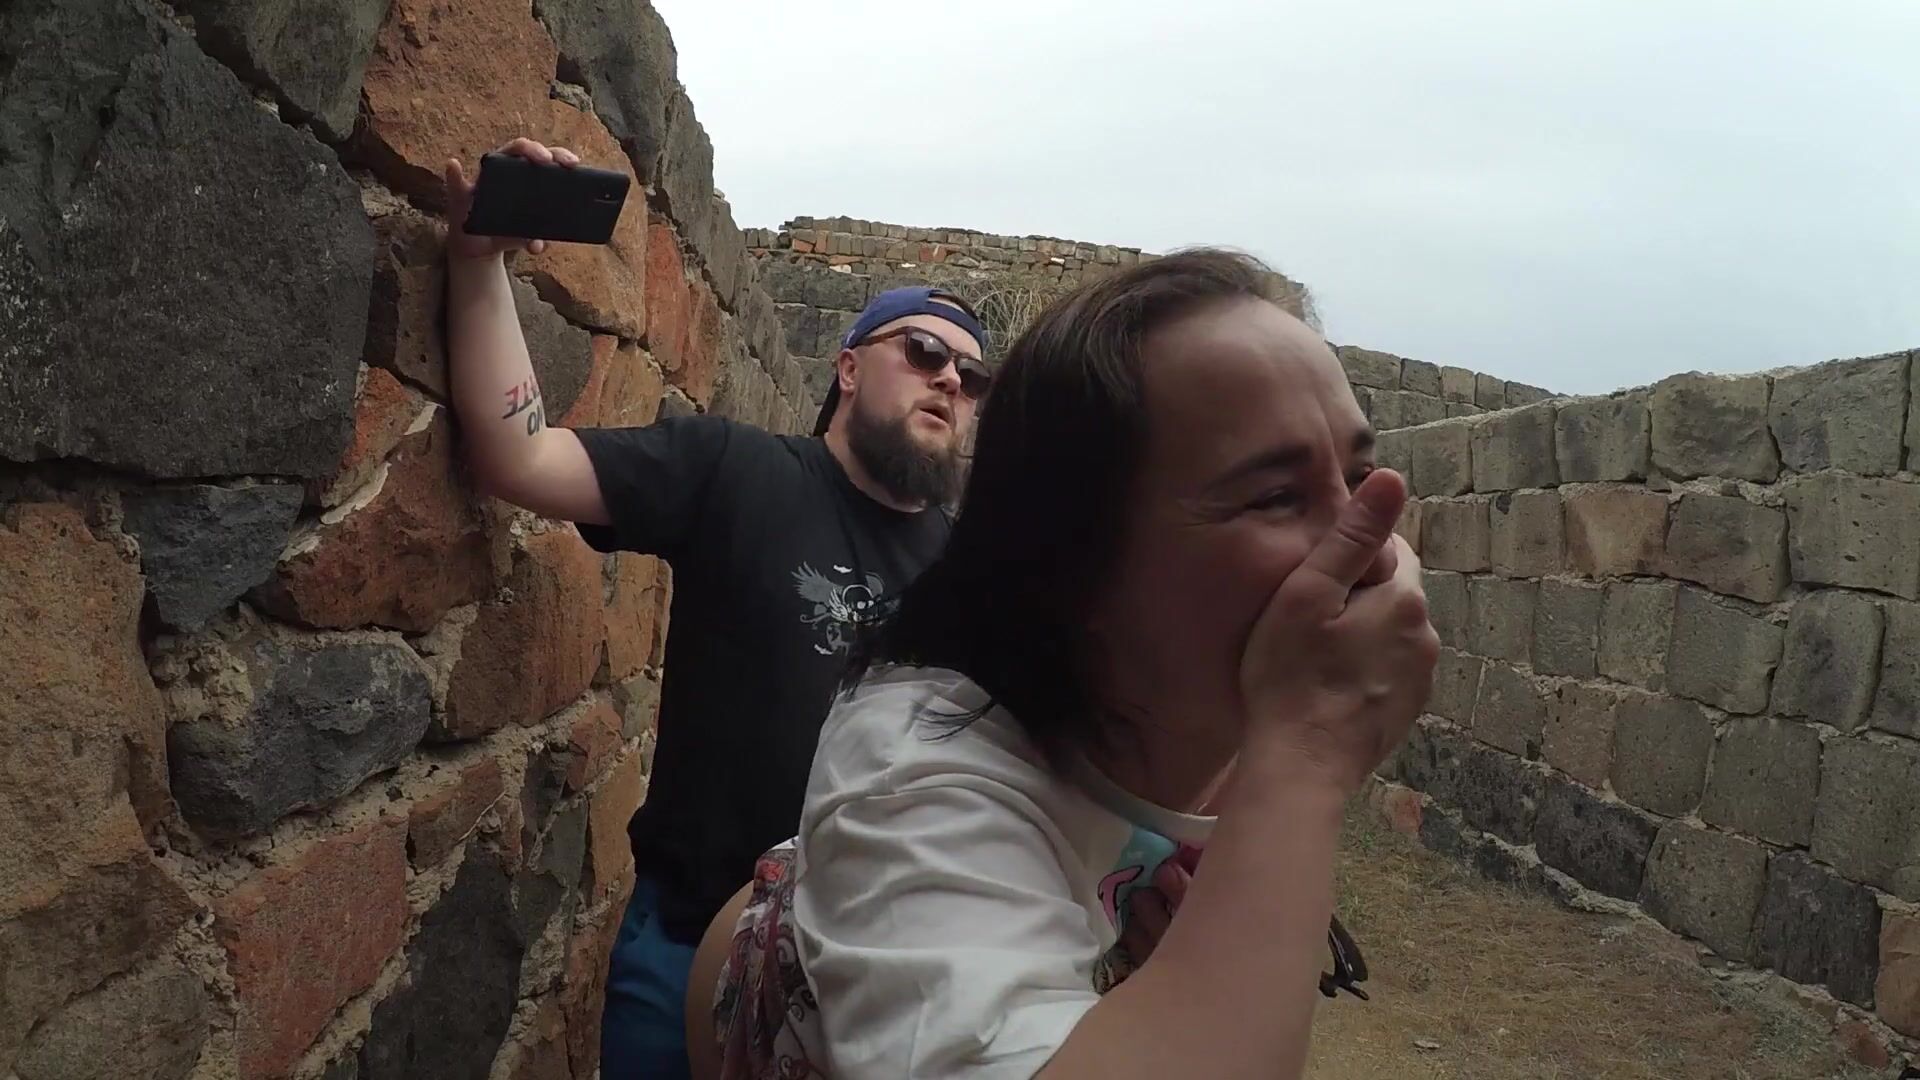 A couple has risky sex while visiting an ancient fortress pic